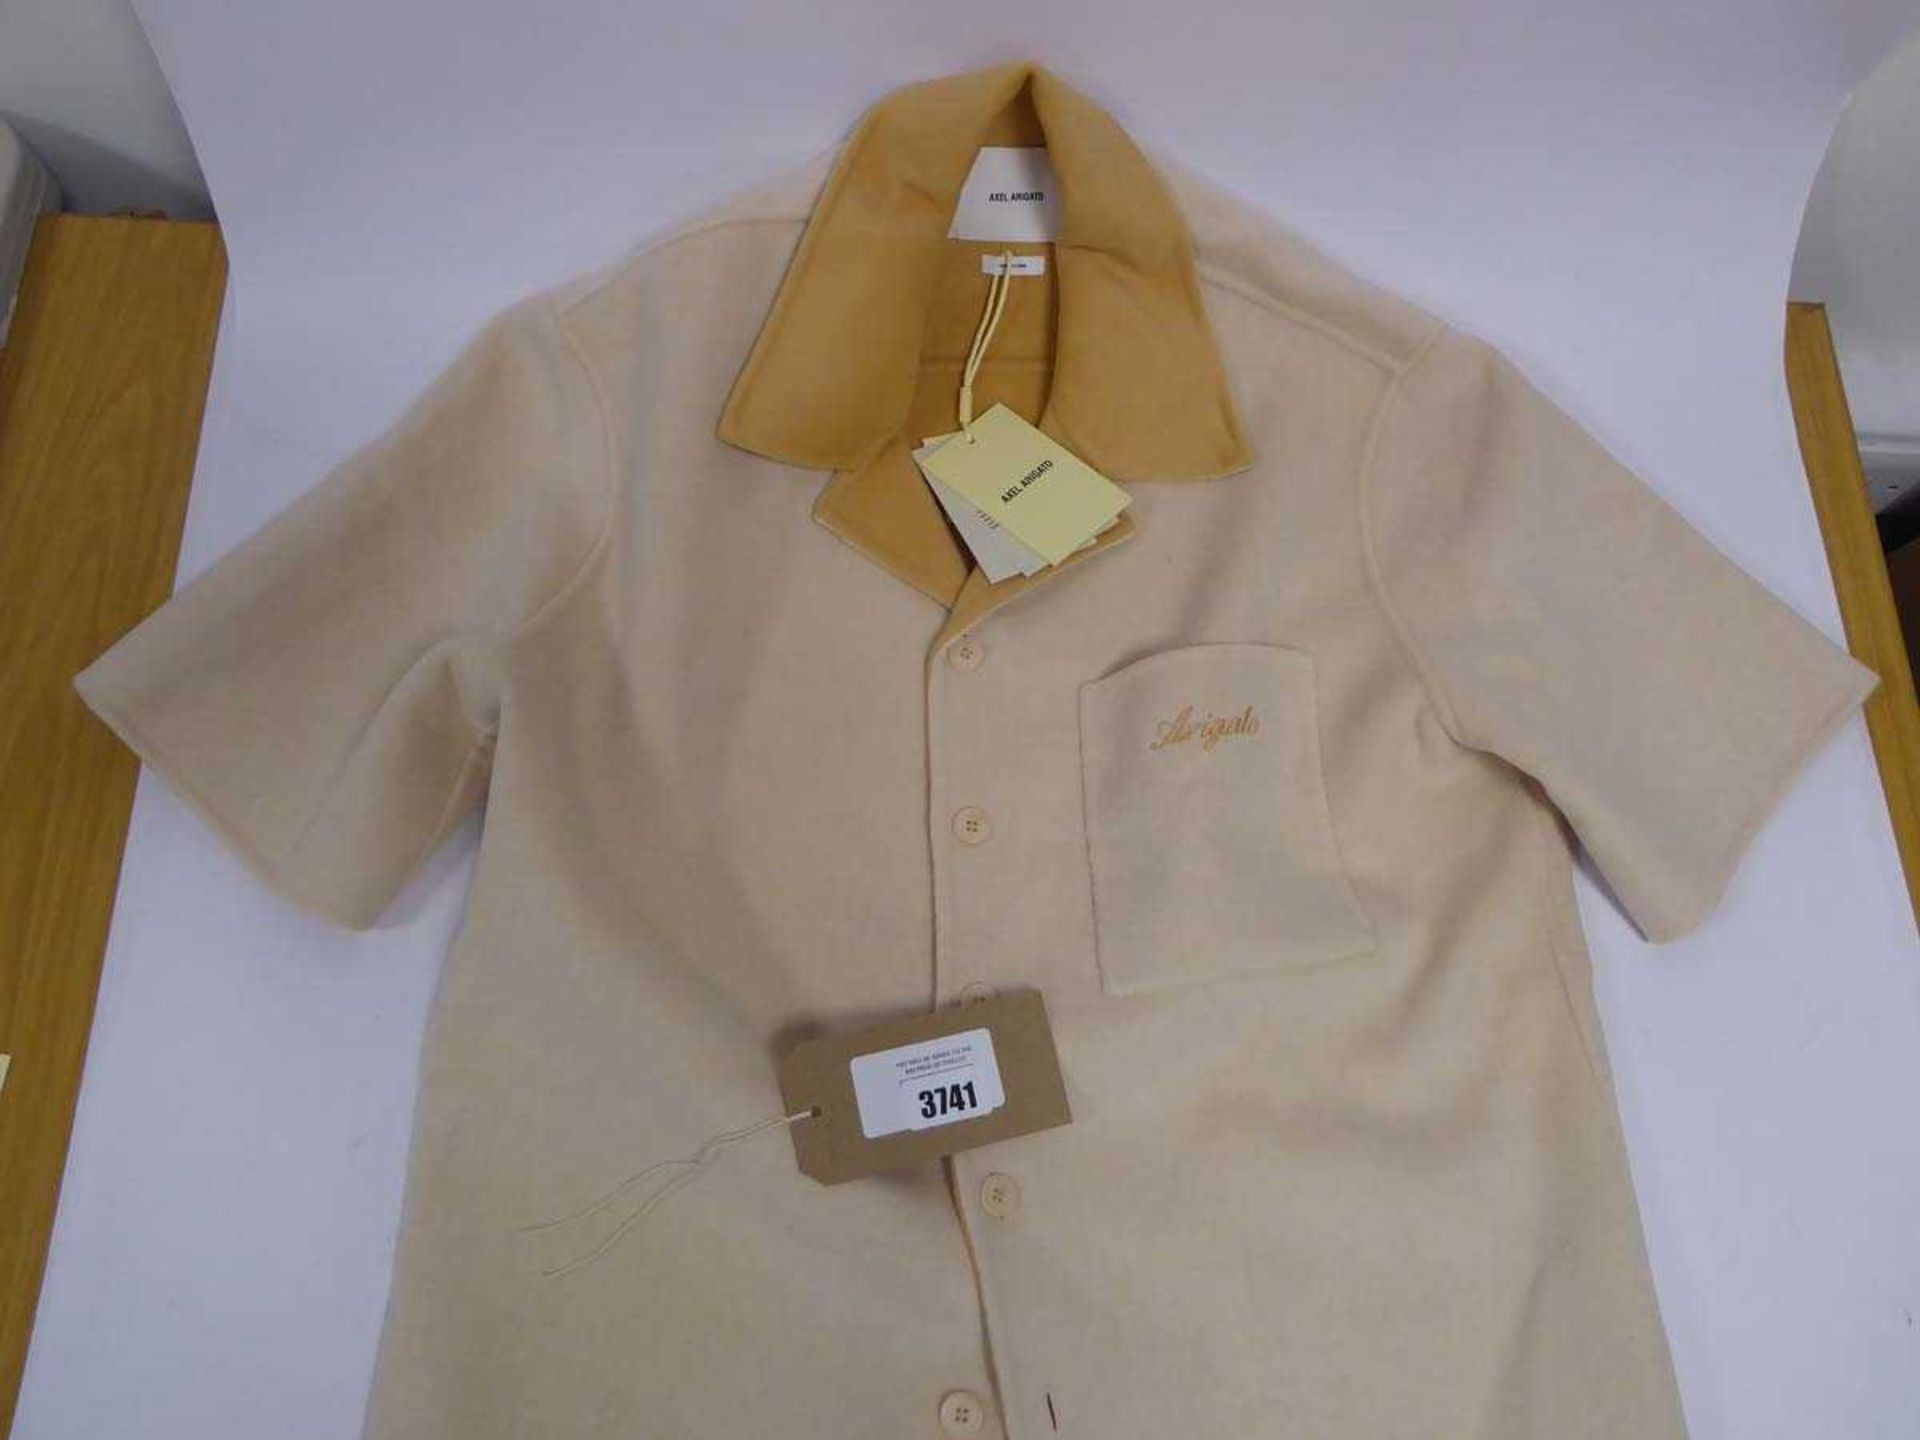 +VAT Axel Arigato holiday shirt in washed beige size small (hanging)